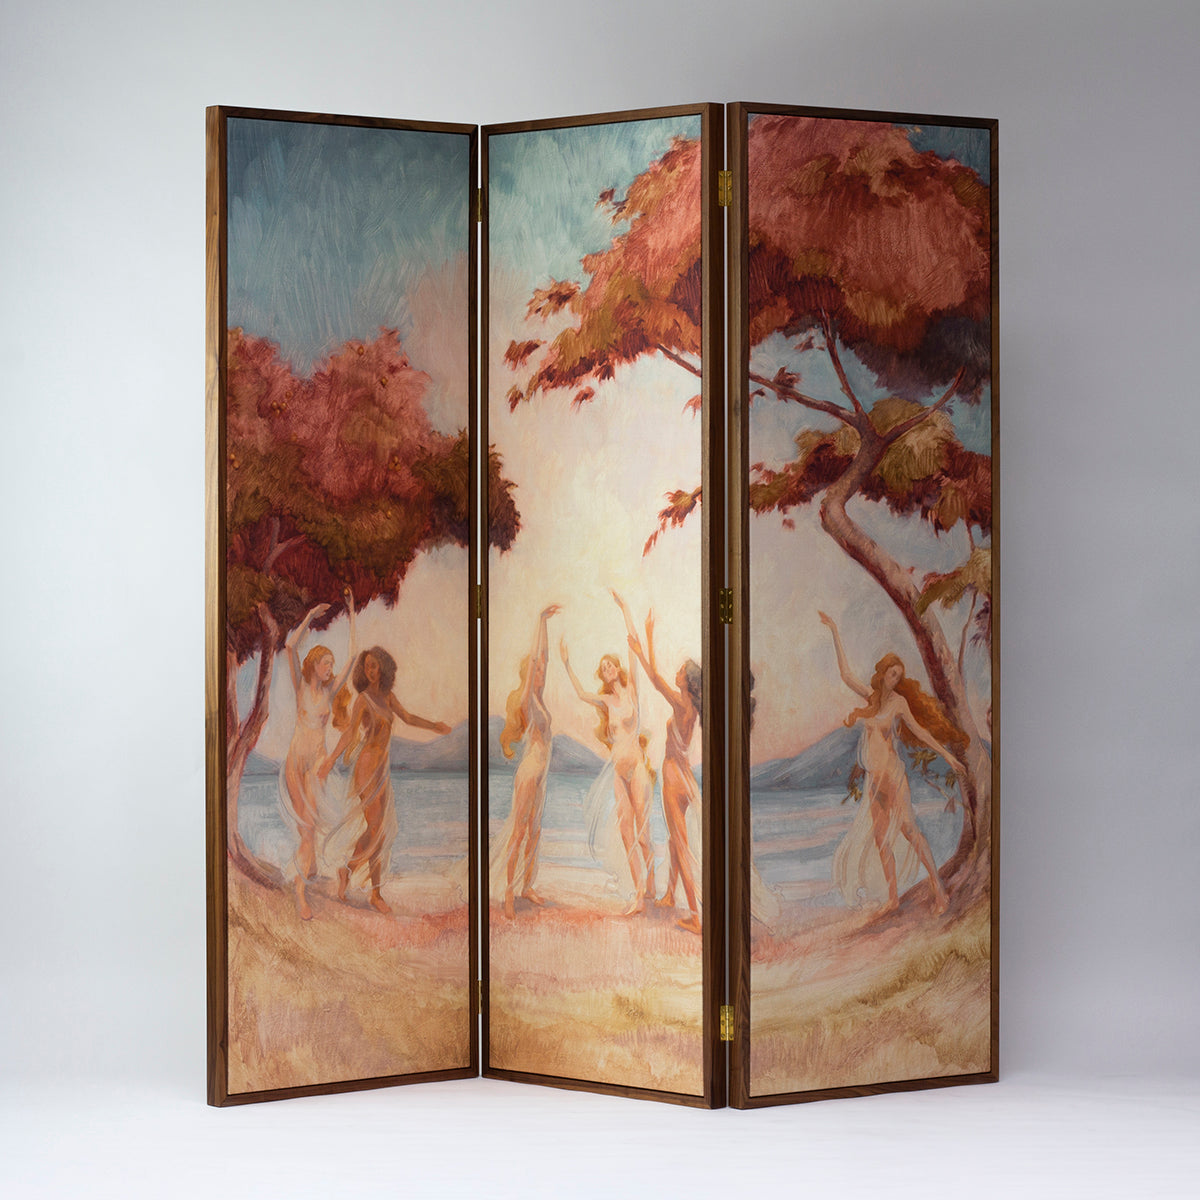 Floating Screen 'Under The Apple Tree'